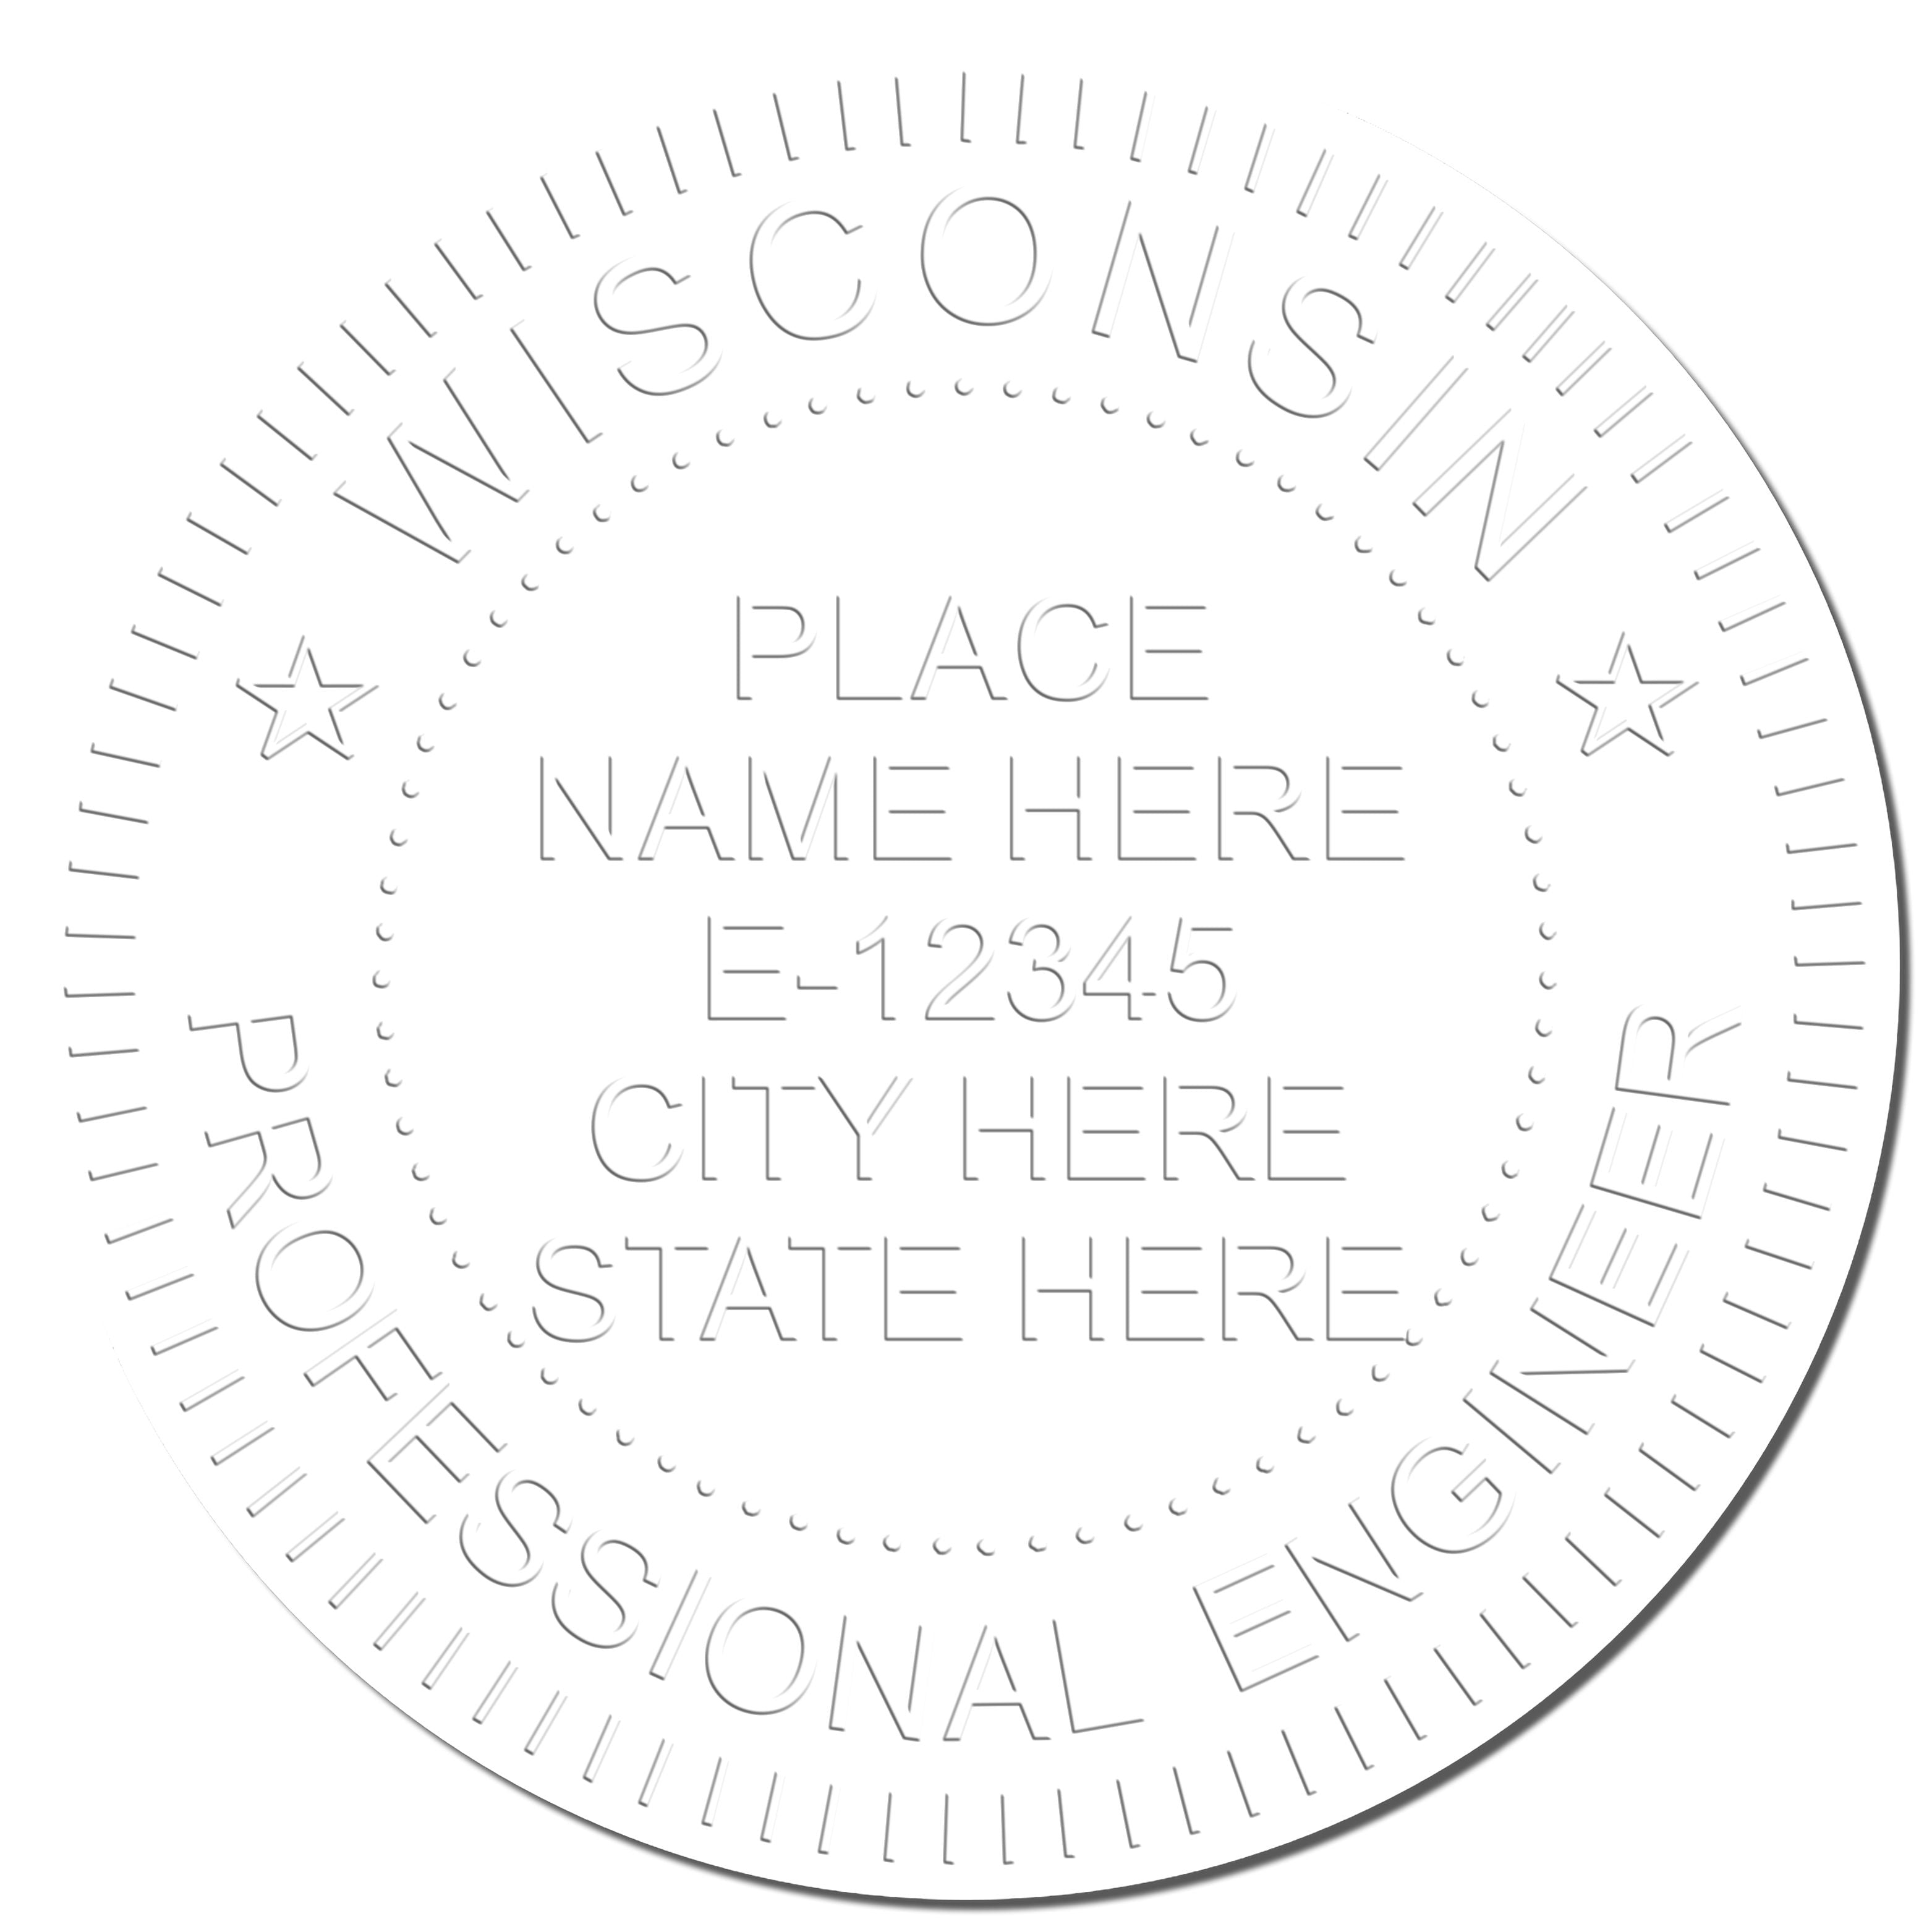 This paper is stamped with a sample imprint of the Heavy Duty Cast Iron Wisconsin Engineer Seal Embosser, signifying its quality and reliability.